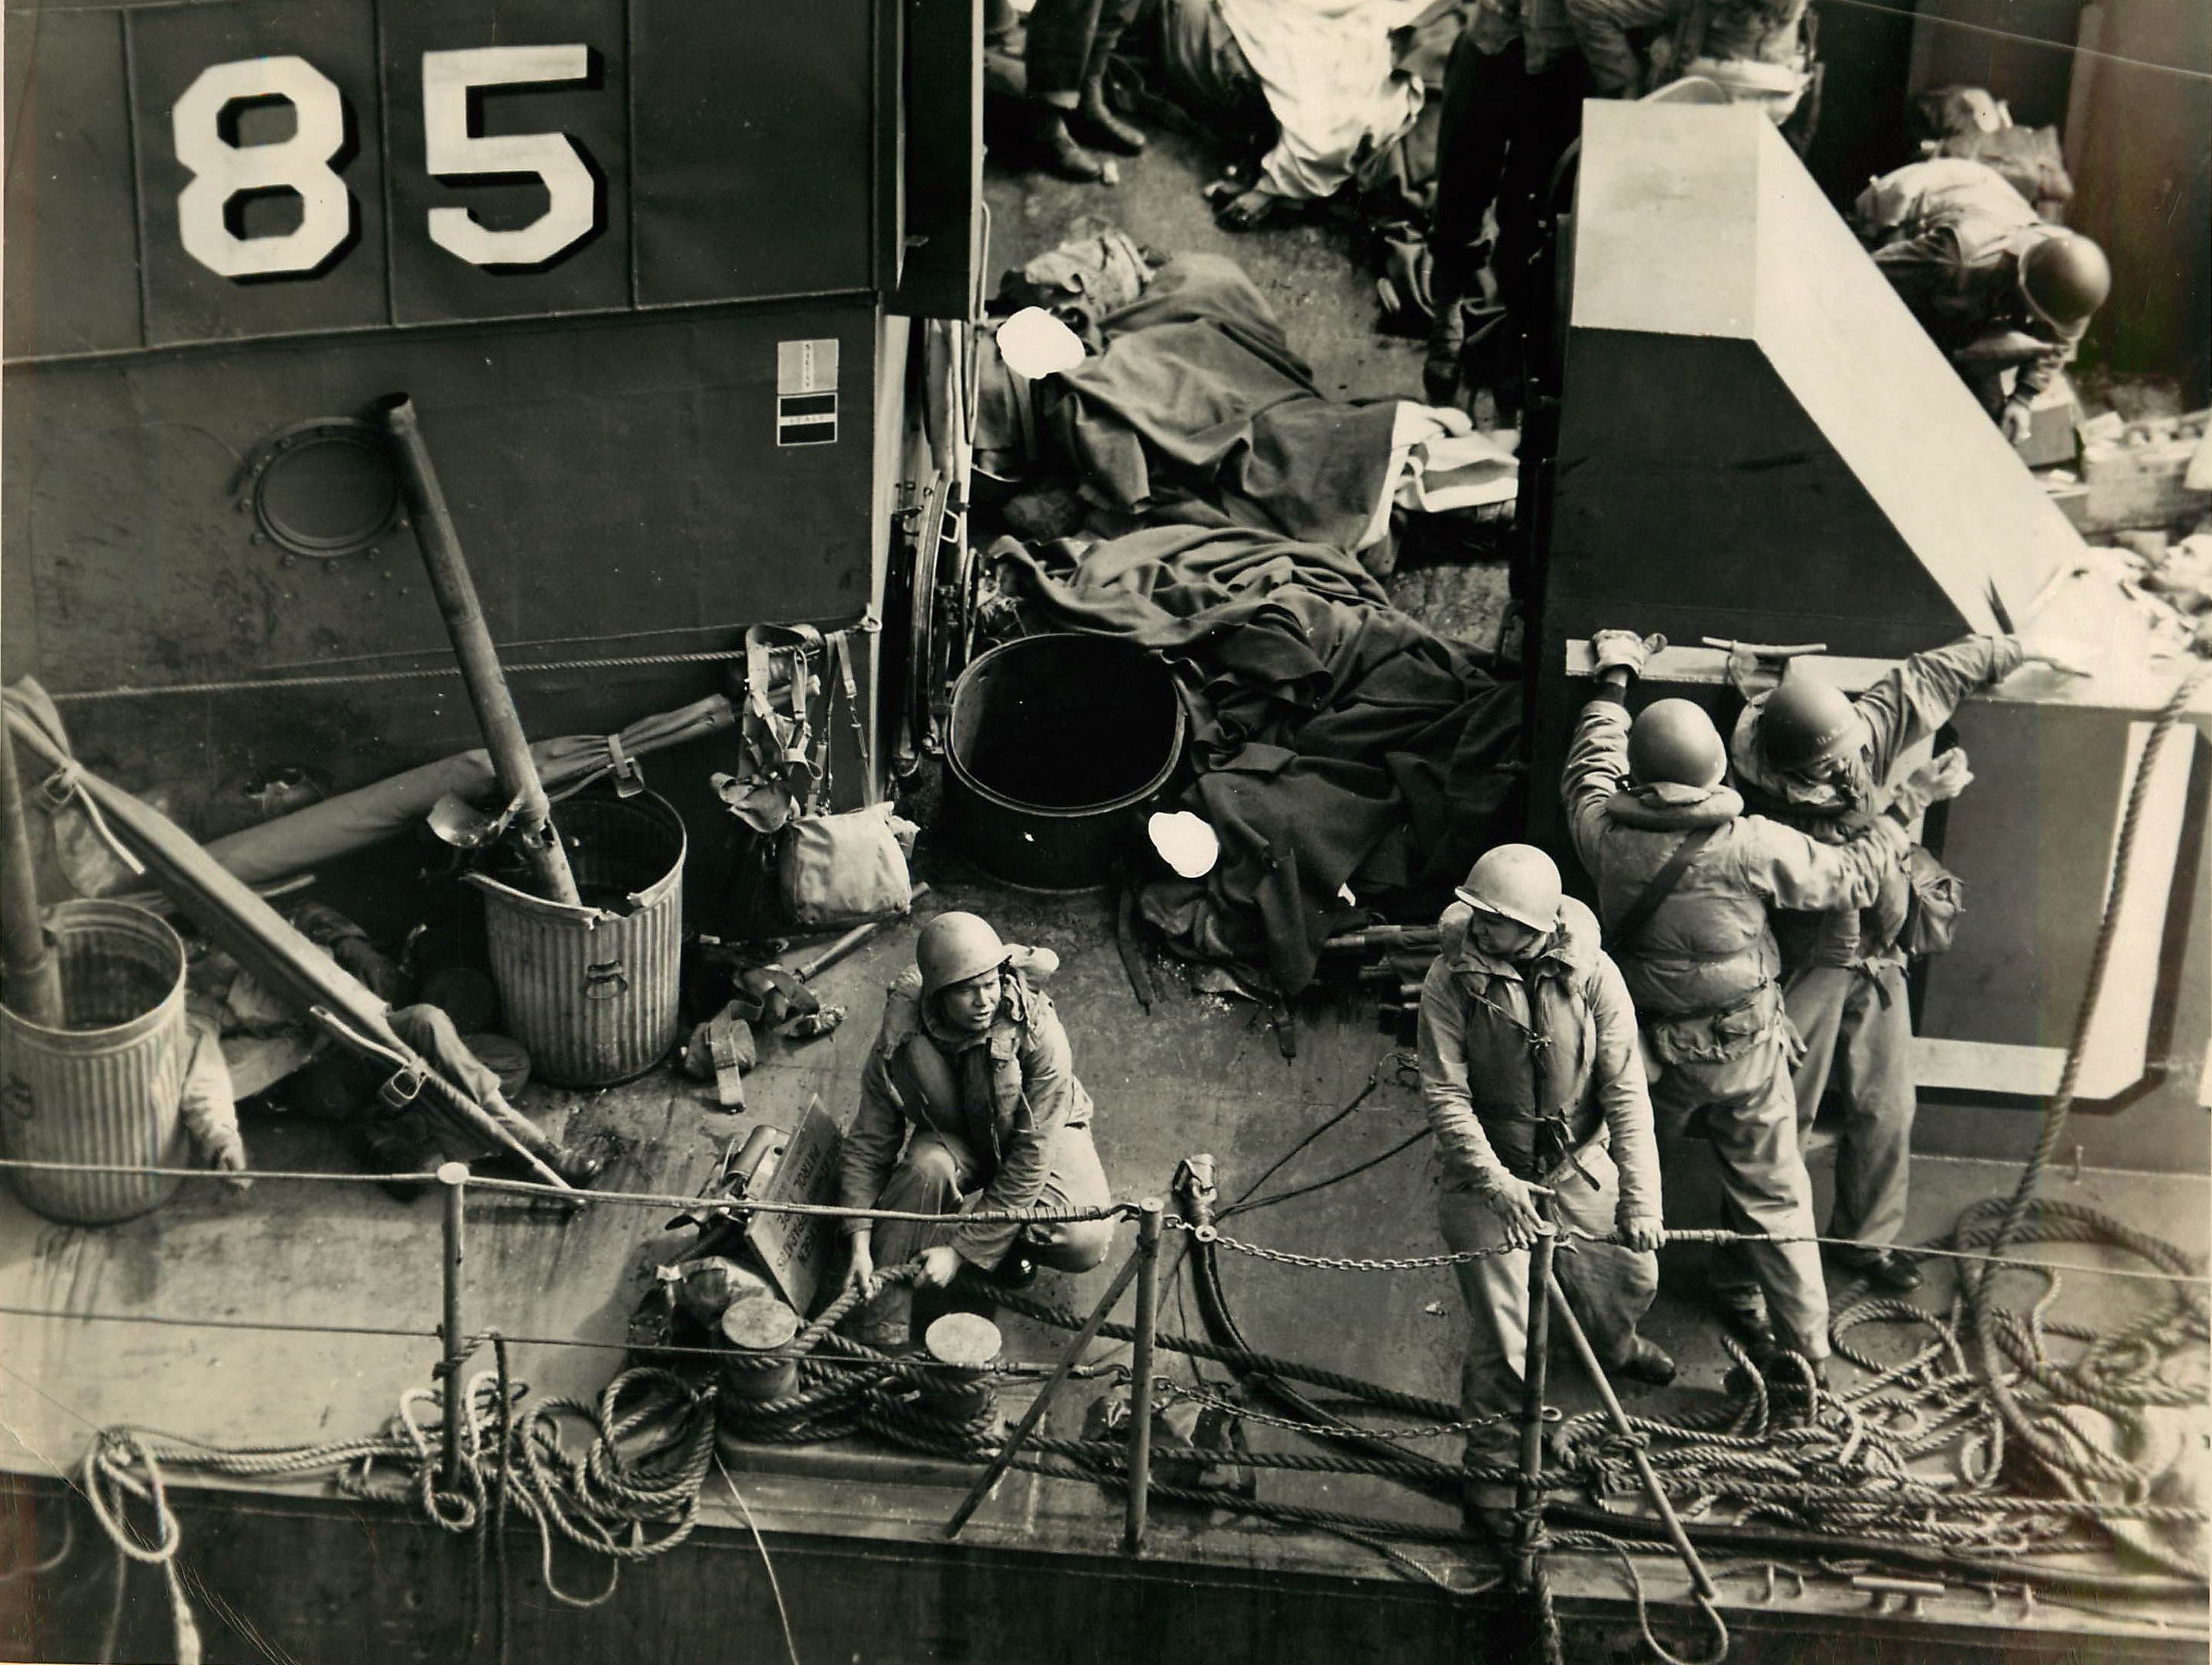 The dead lay on deck while the living struggle to save LCI-85 from sinking. (U.S. Coast Guard)